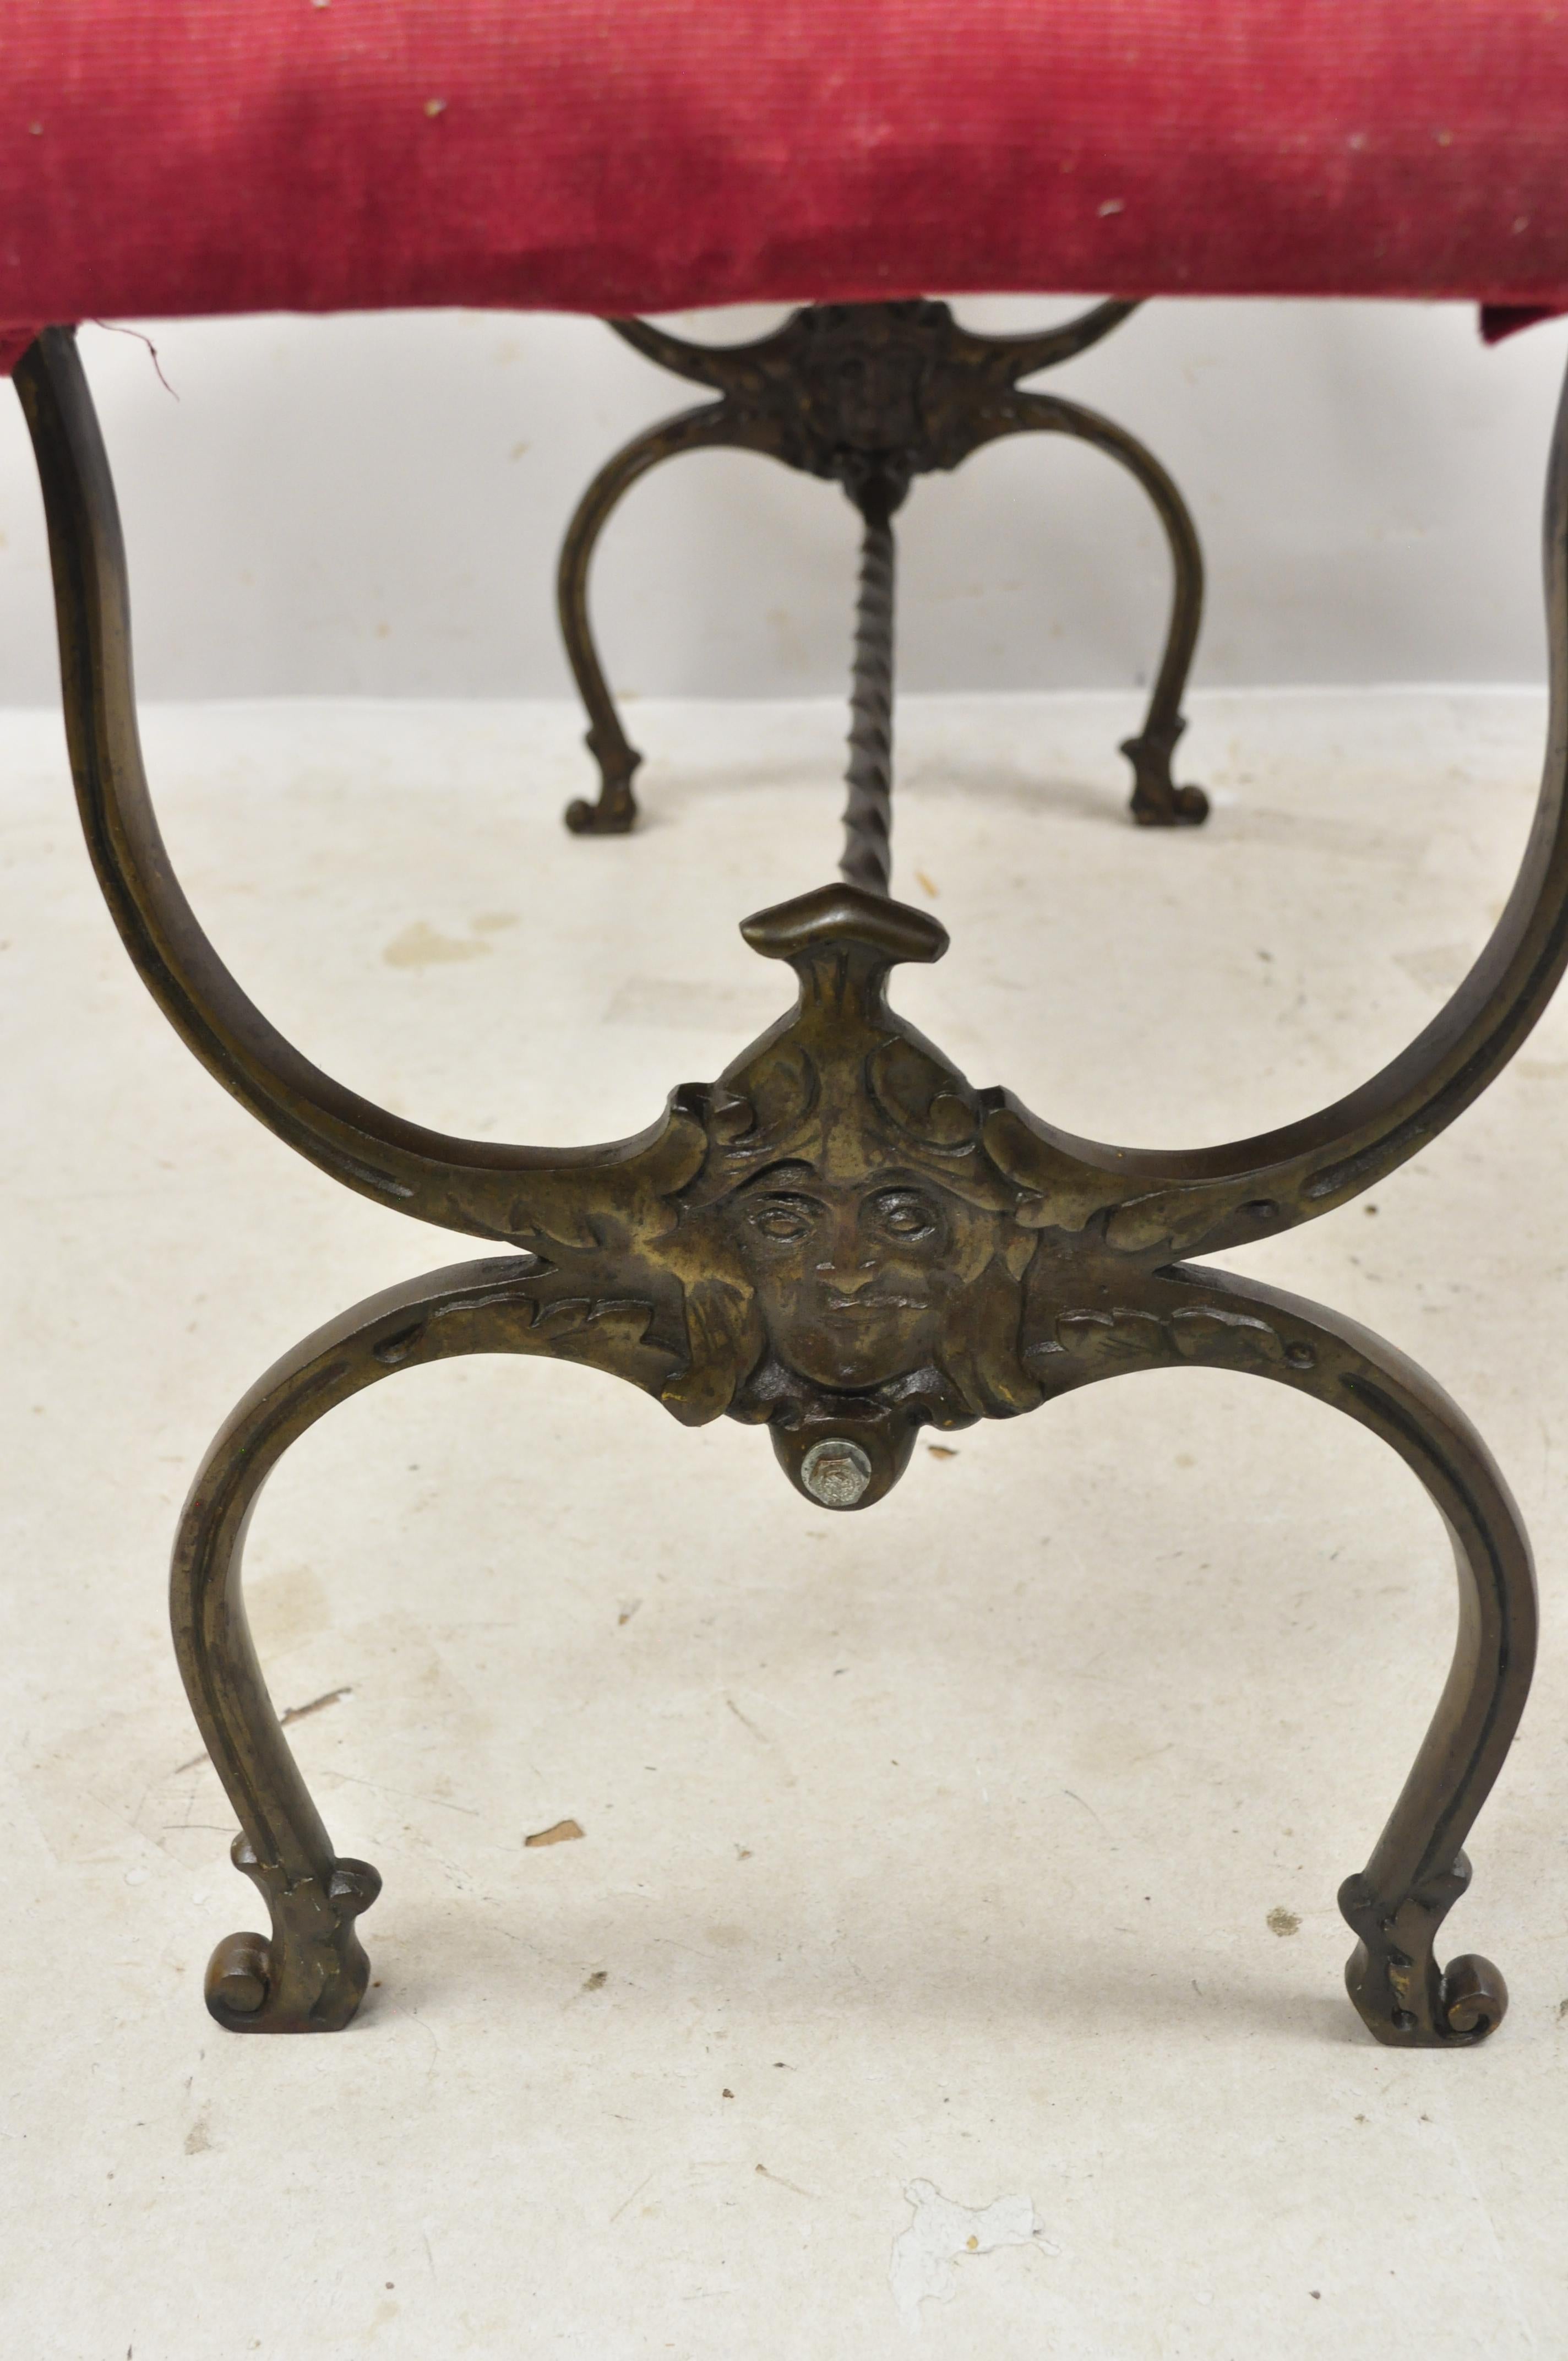 North American Antique Victorian Wrought Iron Figural Bench with Faces and Twisted Stretcher